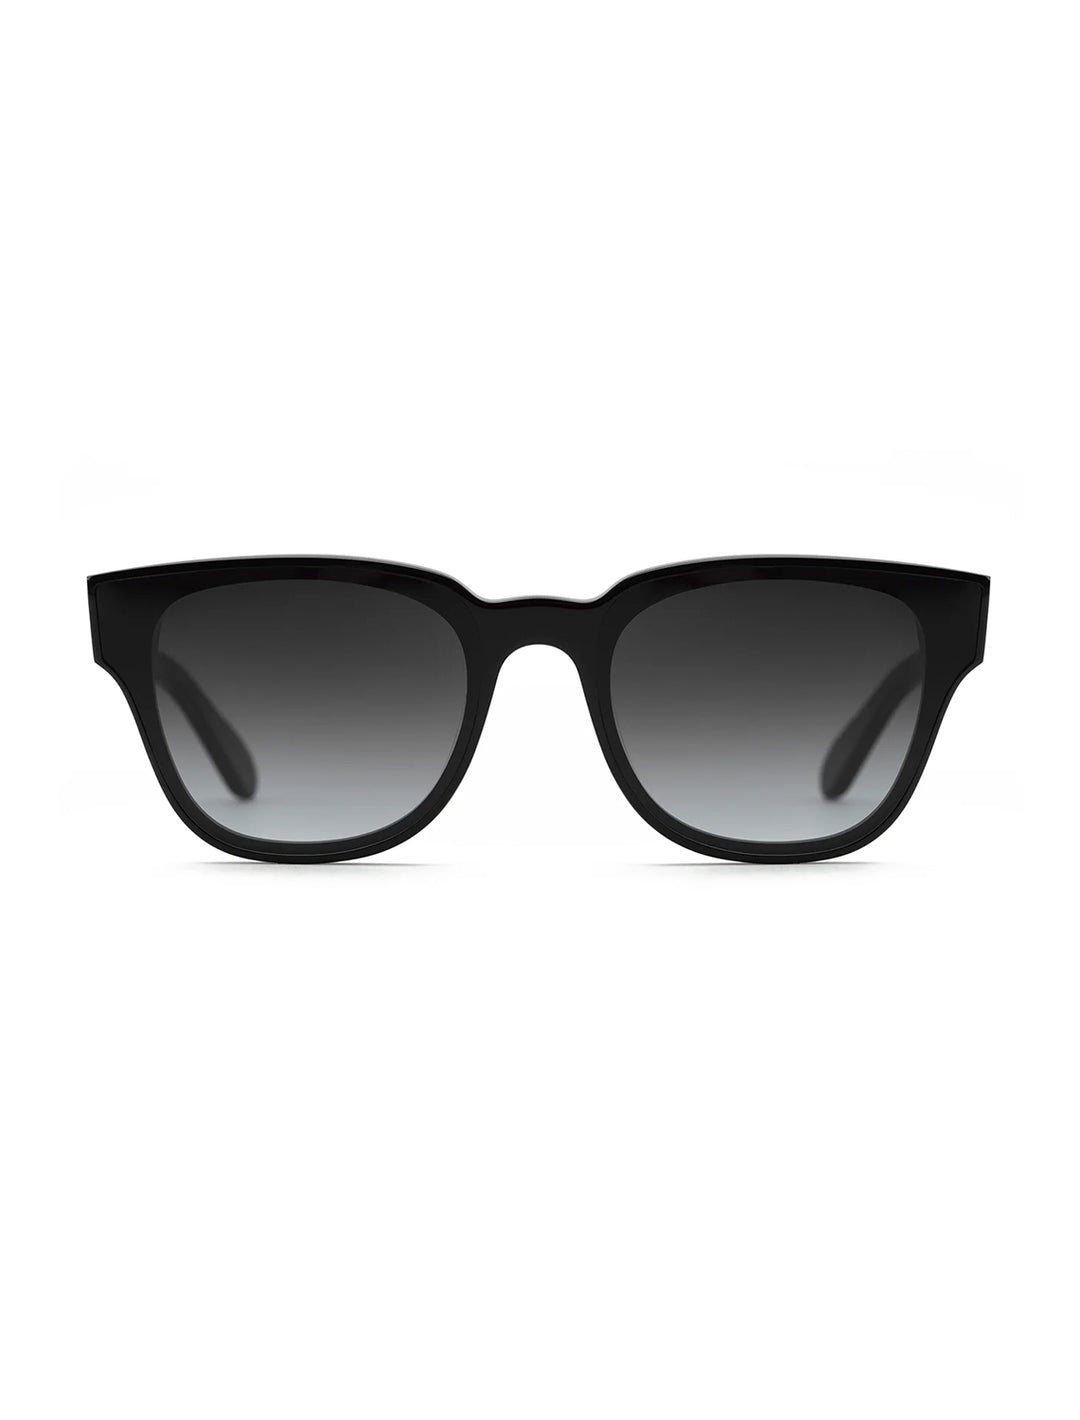 Front view of Krewe's webster nylon black and shadow.